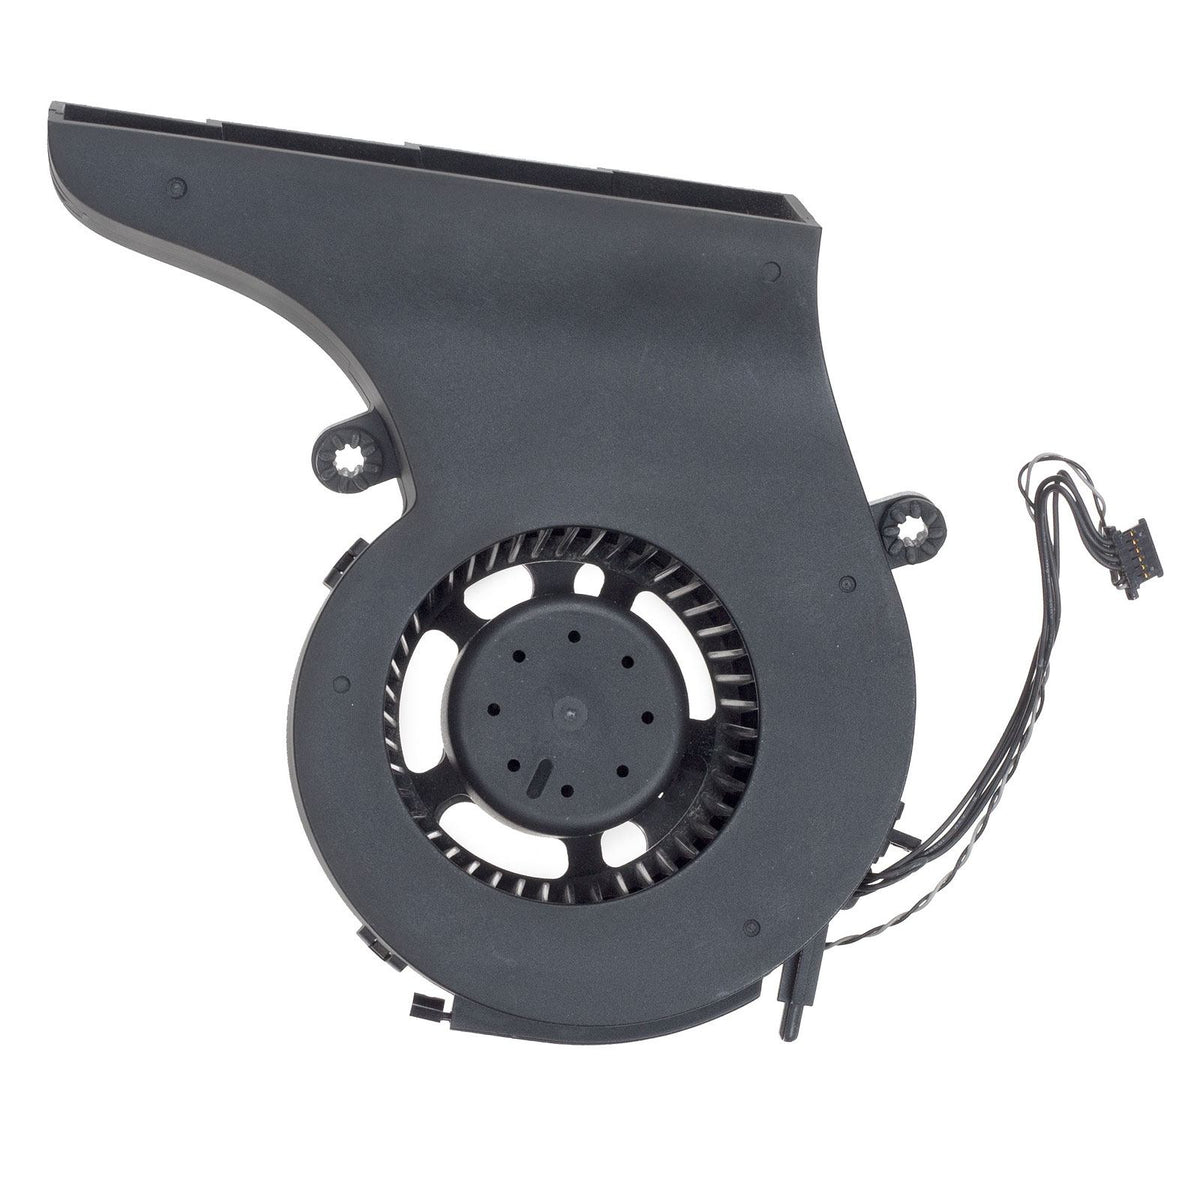 CPU FAN  FOR IMAC 21.5" A1311 (LATE 2009-LATE 2011)